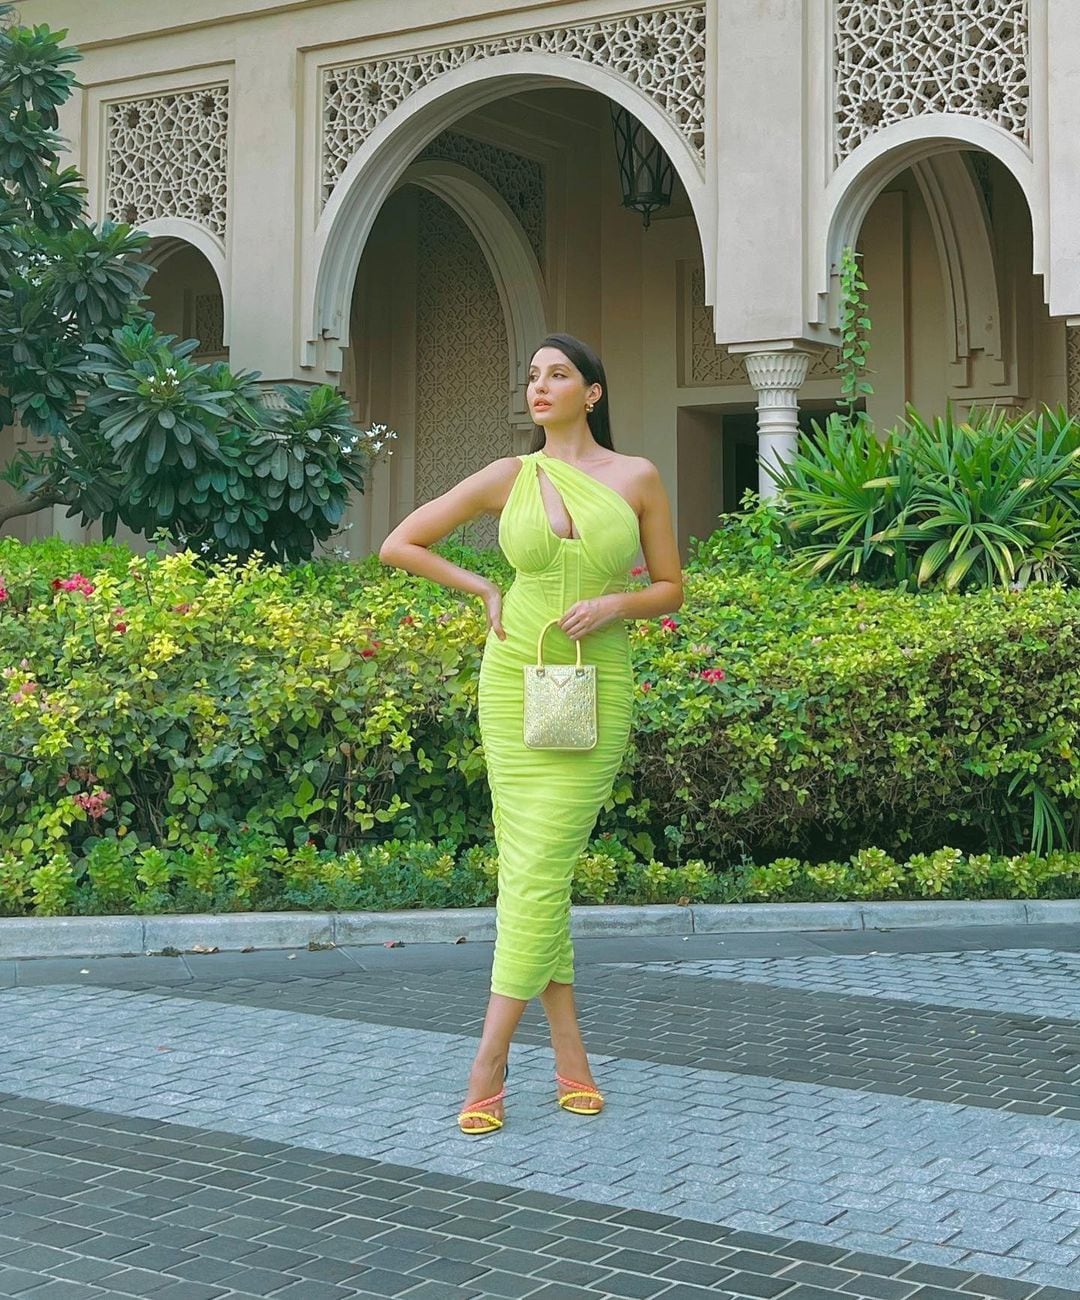 Nora Fatehi flaunts her curves in a neon green bodycon dress.